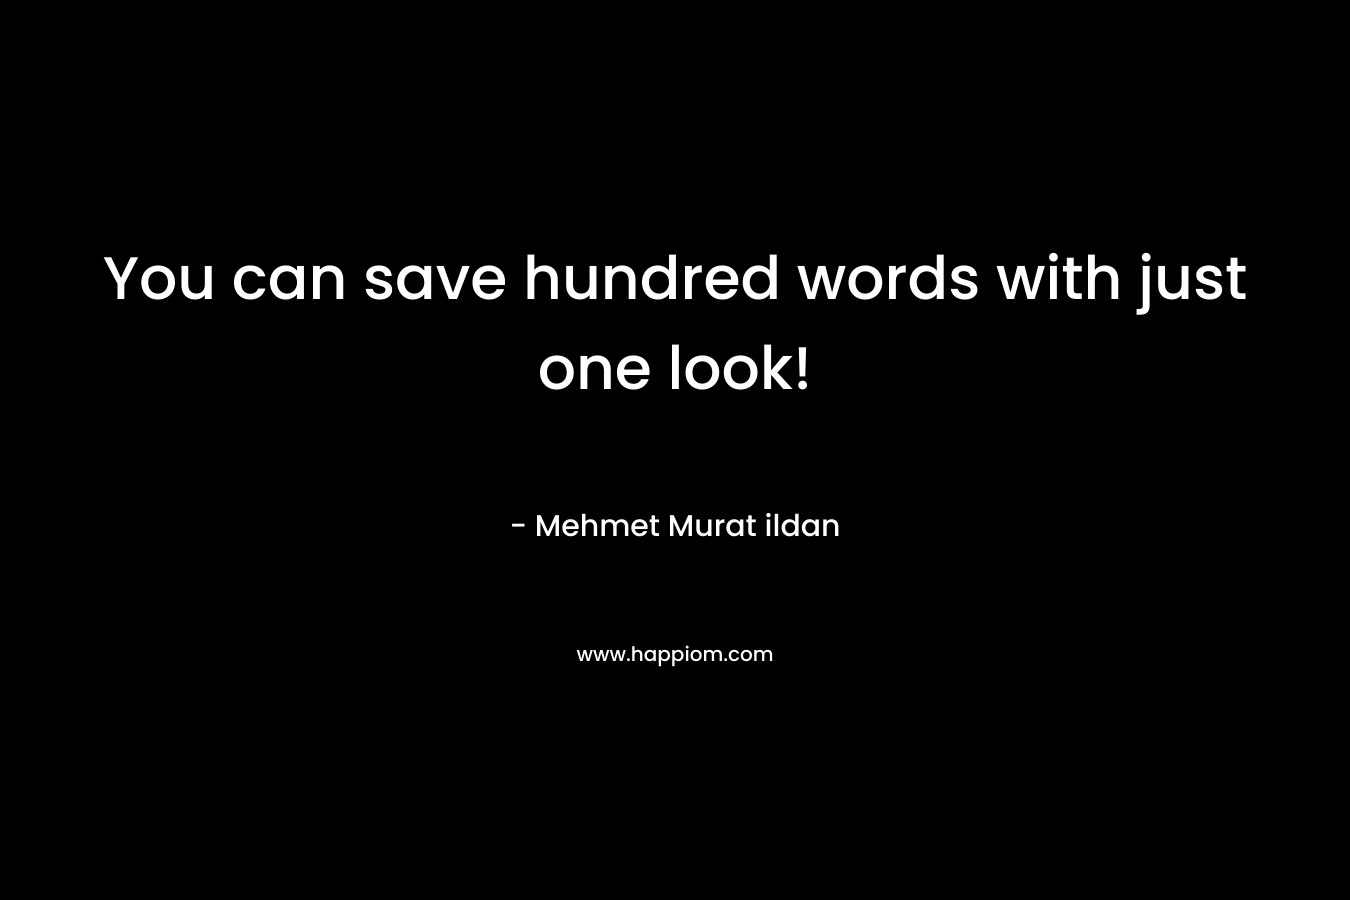 You can save hundred words with just one look!